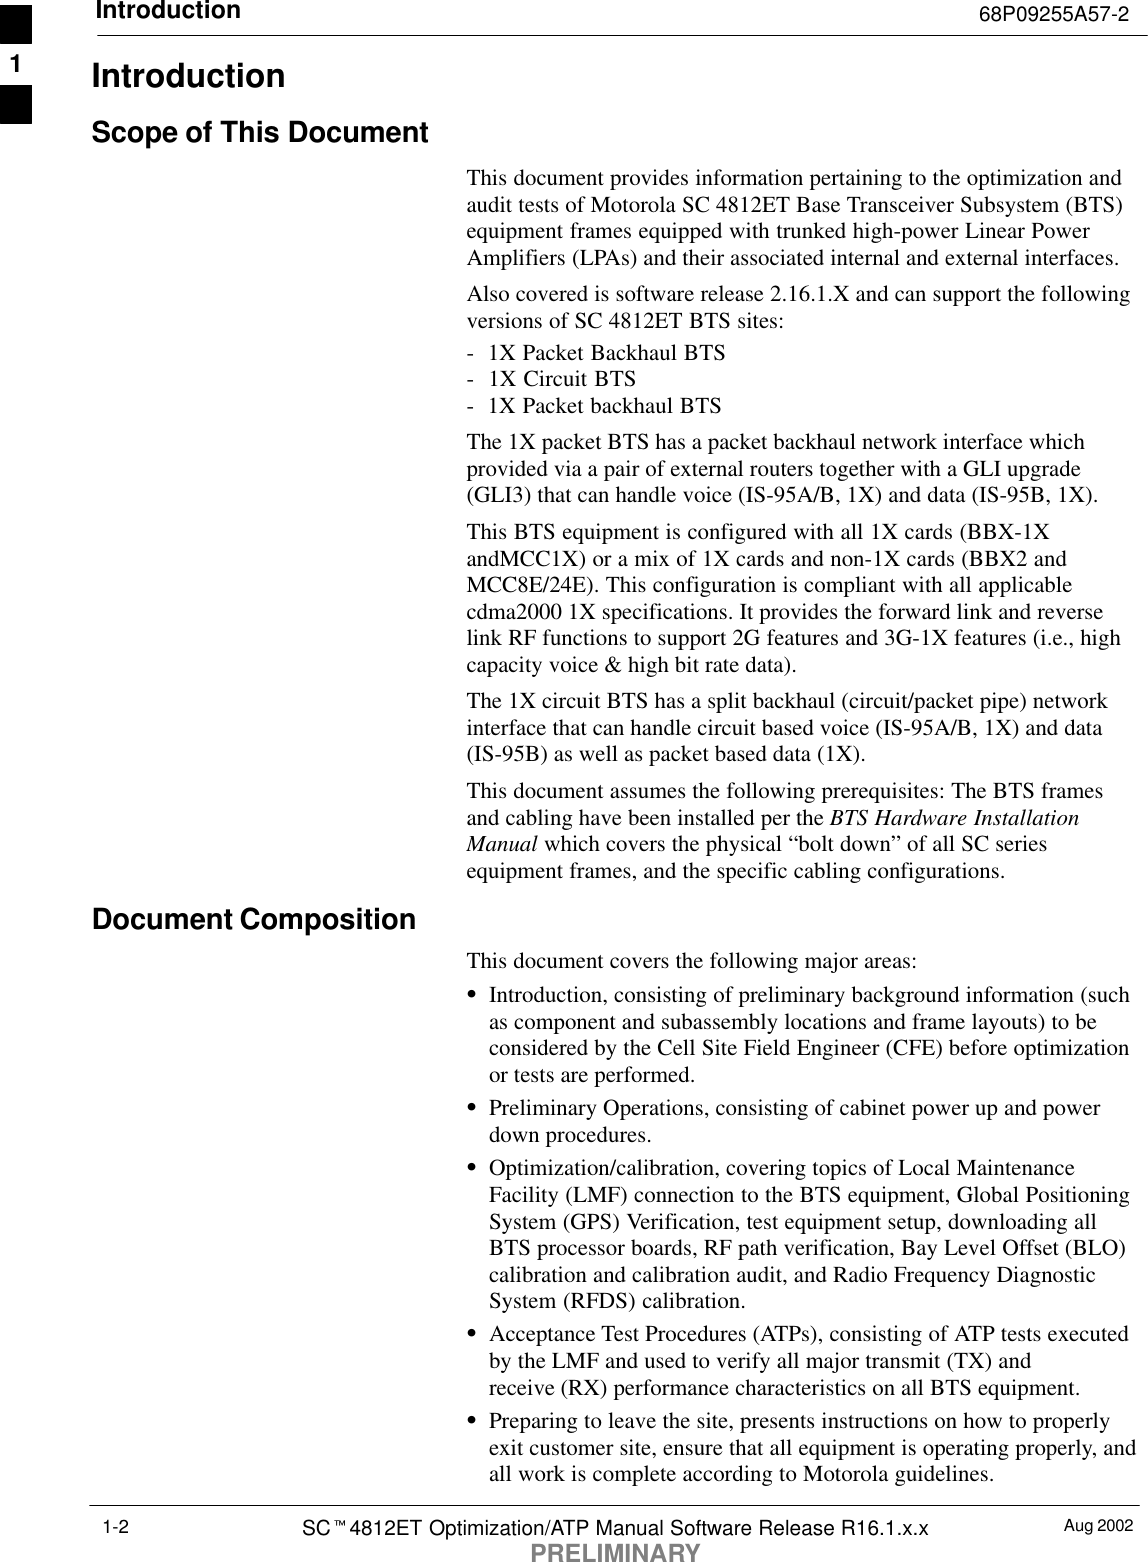 Introduction 68P09255A57-2Aug 2002SCt4812ET Optimization/ATP Manual Software Release R16.1.x.xPRELIMINARY1-2IntroductionScope of This DocumentThis document provides information pertaining to the optimization andaudit tests of Motorola SC 4812ET Base Transceiver Subsystem (BTS)equipment frames equipped with trunked high-power Linear PowerAmplifiers (LPAs) and their associated internal and external interfaces.Also covered is software release 2.16.1.X and can support the followingversions of SC 4812ET BTS sites:-  1X Packet Backhaul BTS-  1X Circuit BTS-  1X Packet backhaul BTSThe 1X packet BTS has a packet backhaul network interface whichprovided via a pair of external routers together with a GLI upgrade(GLI3) that can handle voice (IS-95A/B, 1X) and data (IS-95B, 1X).This BTS equipment is configured with all 1X cards (BBX-1XandMCC1X) or a mix of 1X cards and non-1X cards (BBX2 andMCC8E/24E). This configuration is compliant with all applicablecdma2000 1X specifications. It provides the forward link and reverselink RF functions to support 2G features and 3G-1X features (i.e., highcapacity voice &amp; high bit rate data).The 1X circuit BTS has a split backhaul (circuit/packet pipe) networkinterface that can handle circuit based voice (IS-95A/B, 1X) and data(IS-95B) as well as packet based data (1X).This document assumes the following prerequisites: The BTS framesand cabling have been installed per the BTS Hardware InstallationManual which covers the physical “bolt down” of all SC seriesequipment frames, and the specific cabling configurations.Document CompositionThis document covers the following major areas:SIntroduction, consisting of preliminary background information (suchas component and subassembly locations and frame layouts) to beconsidered by the Cell Site Field Engineer (CFE) before optimizationor tests are performed.SPreliminary Operations, consisting of cabinet power up and powerdown procedures.SOptimization/calibration, covering topics of Local MaintenanceFacility (LMF) connection to the BTS equipment, Global PositioningSystem (GPS) Verification, test equipment setup, downloading allBTS processor boards, RF path verification, Bay Level Offset (BLO)calibration and calibration audit, and Radio Frequency DiagnosticSystem (RFDS) calibration.SAcceptance Test Procedures (ATPs), consisting of ATP tests executedby the LMF and used to verify all major transmit (TX) andreceive (RX) performance characteristics on all BTS equipment.SPreparing to leave the site, presents instructions on how to properlyexit customer site, ensure that all equipment is operating properly, andall work is complete according to Motorola guidelines.1